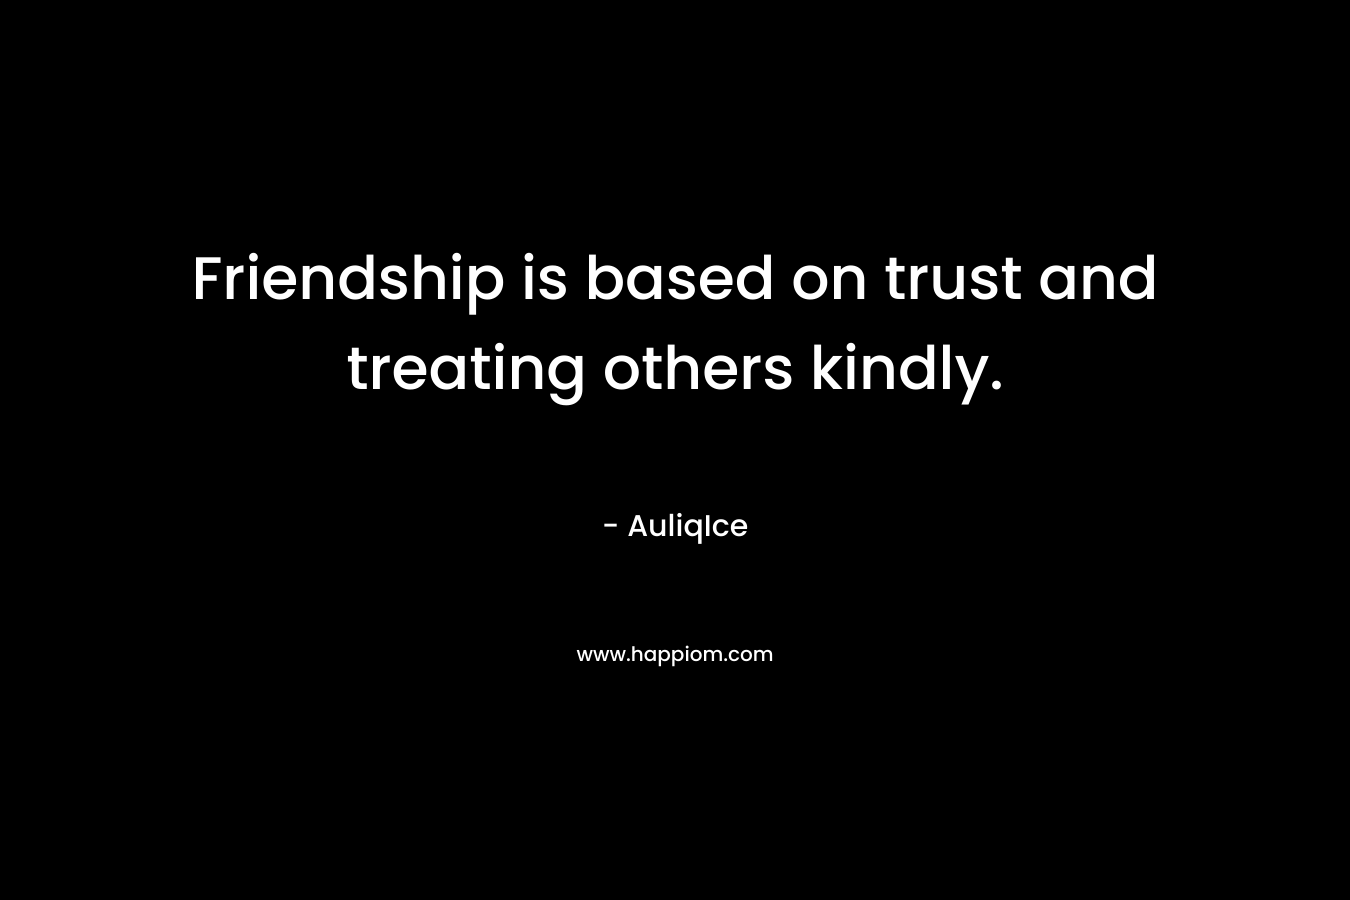 Friendship is based on trust and treating others kindly.